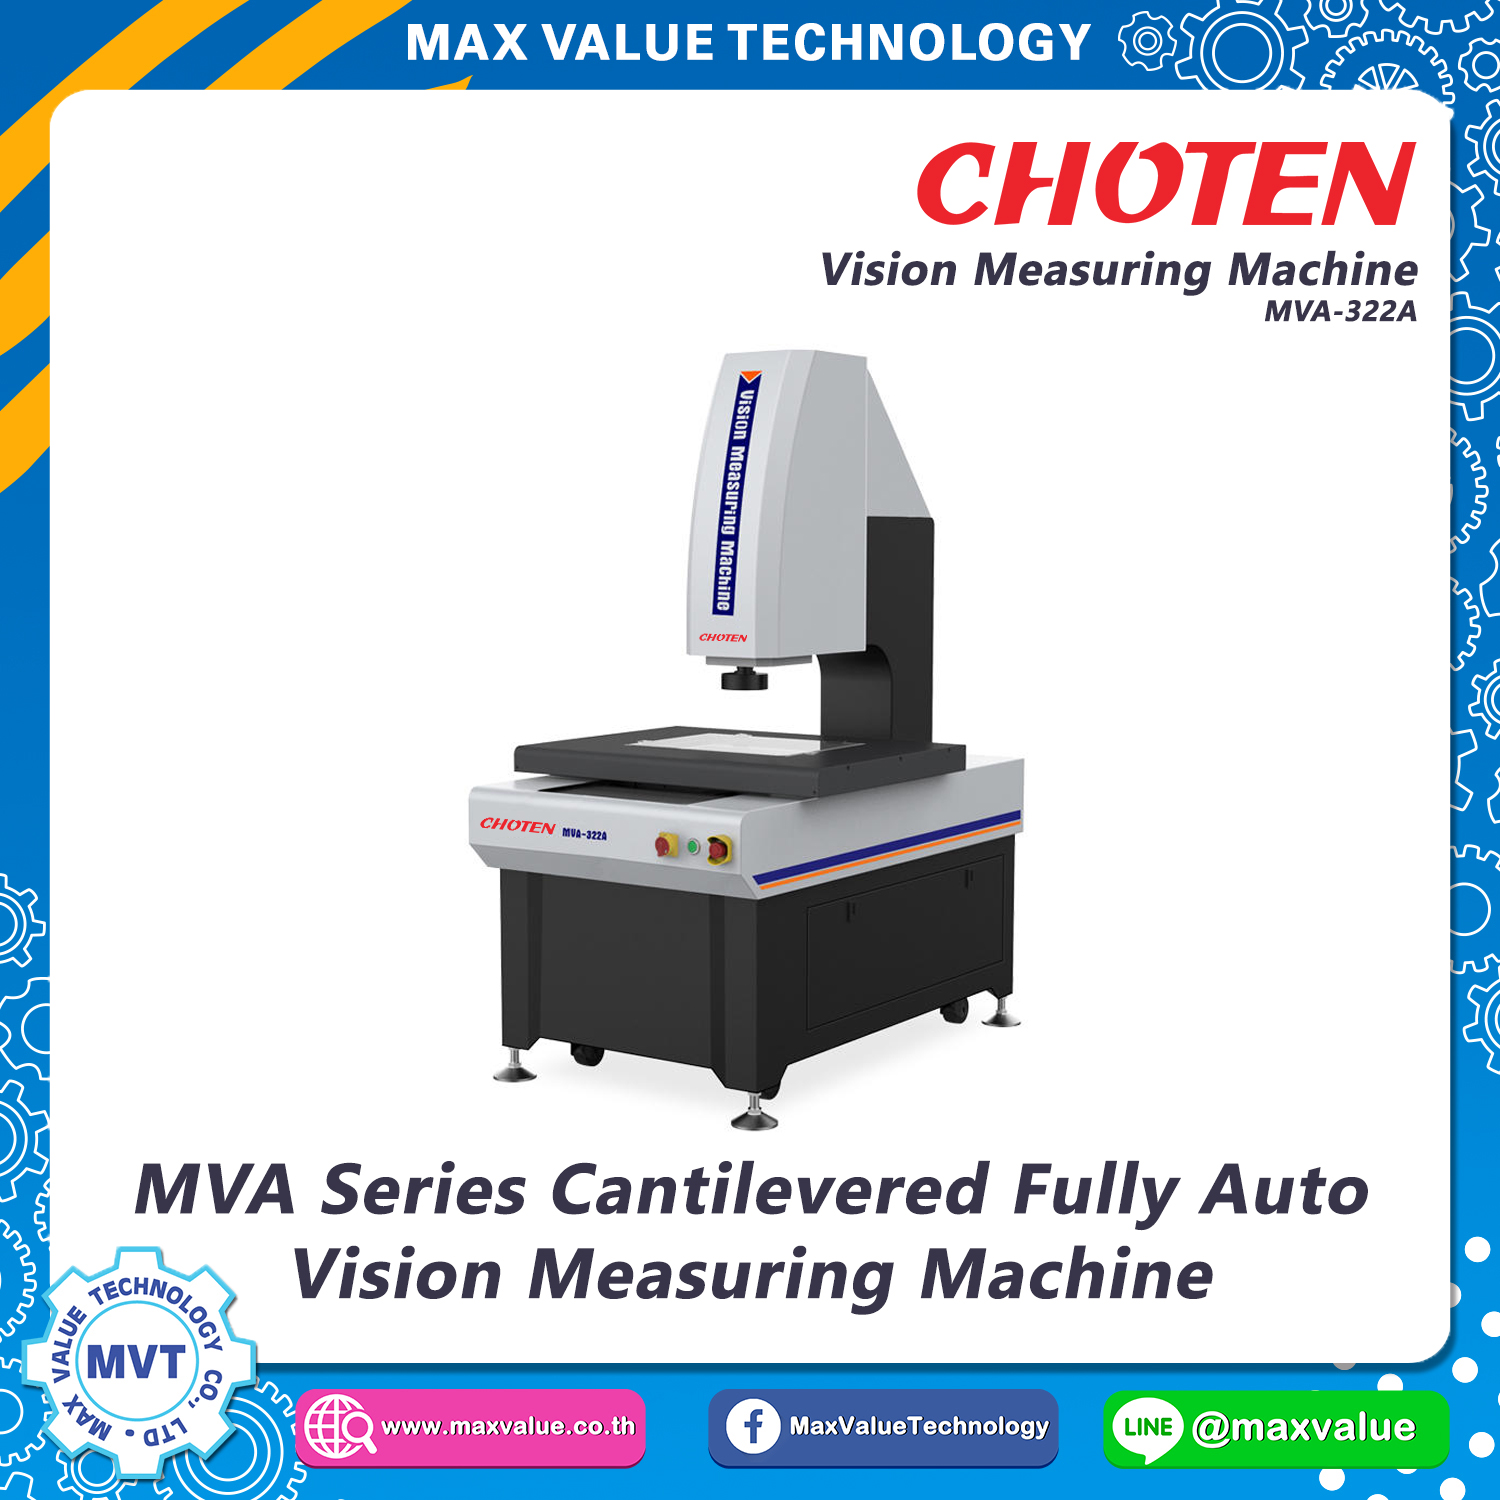 MVA Series Cantilevered Fully Auto Vision Measuring Machine